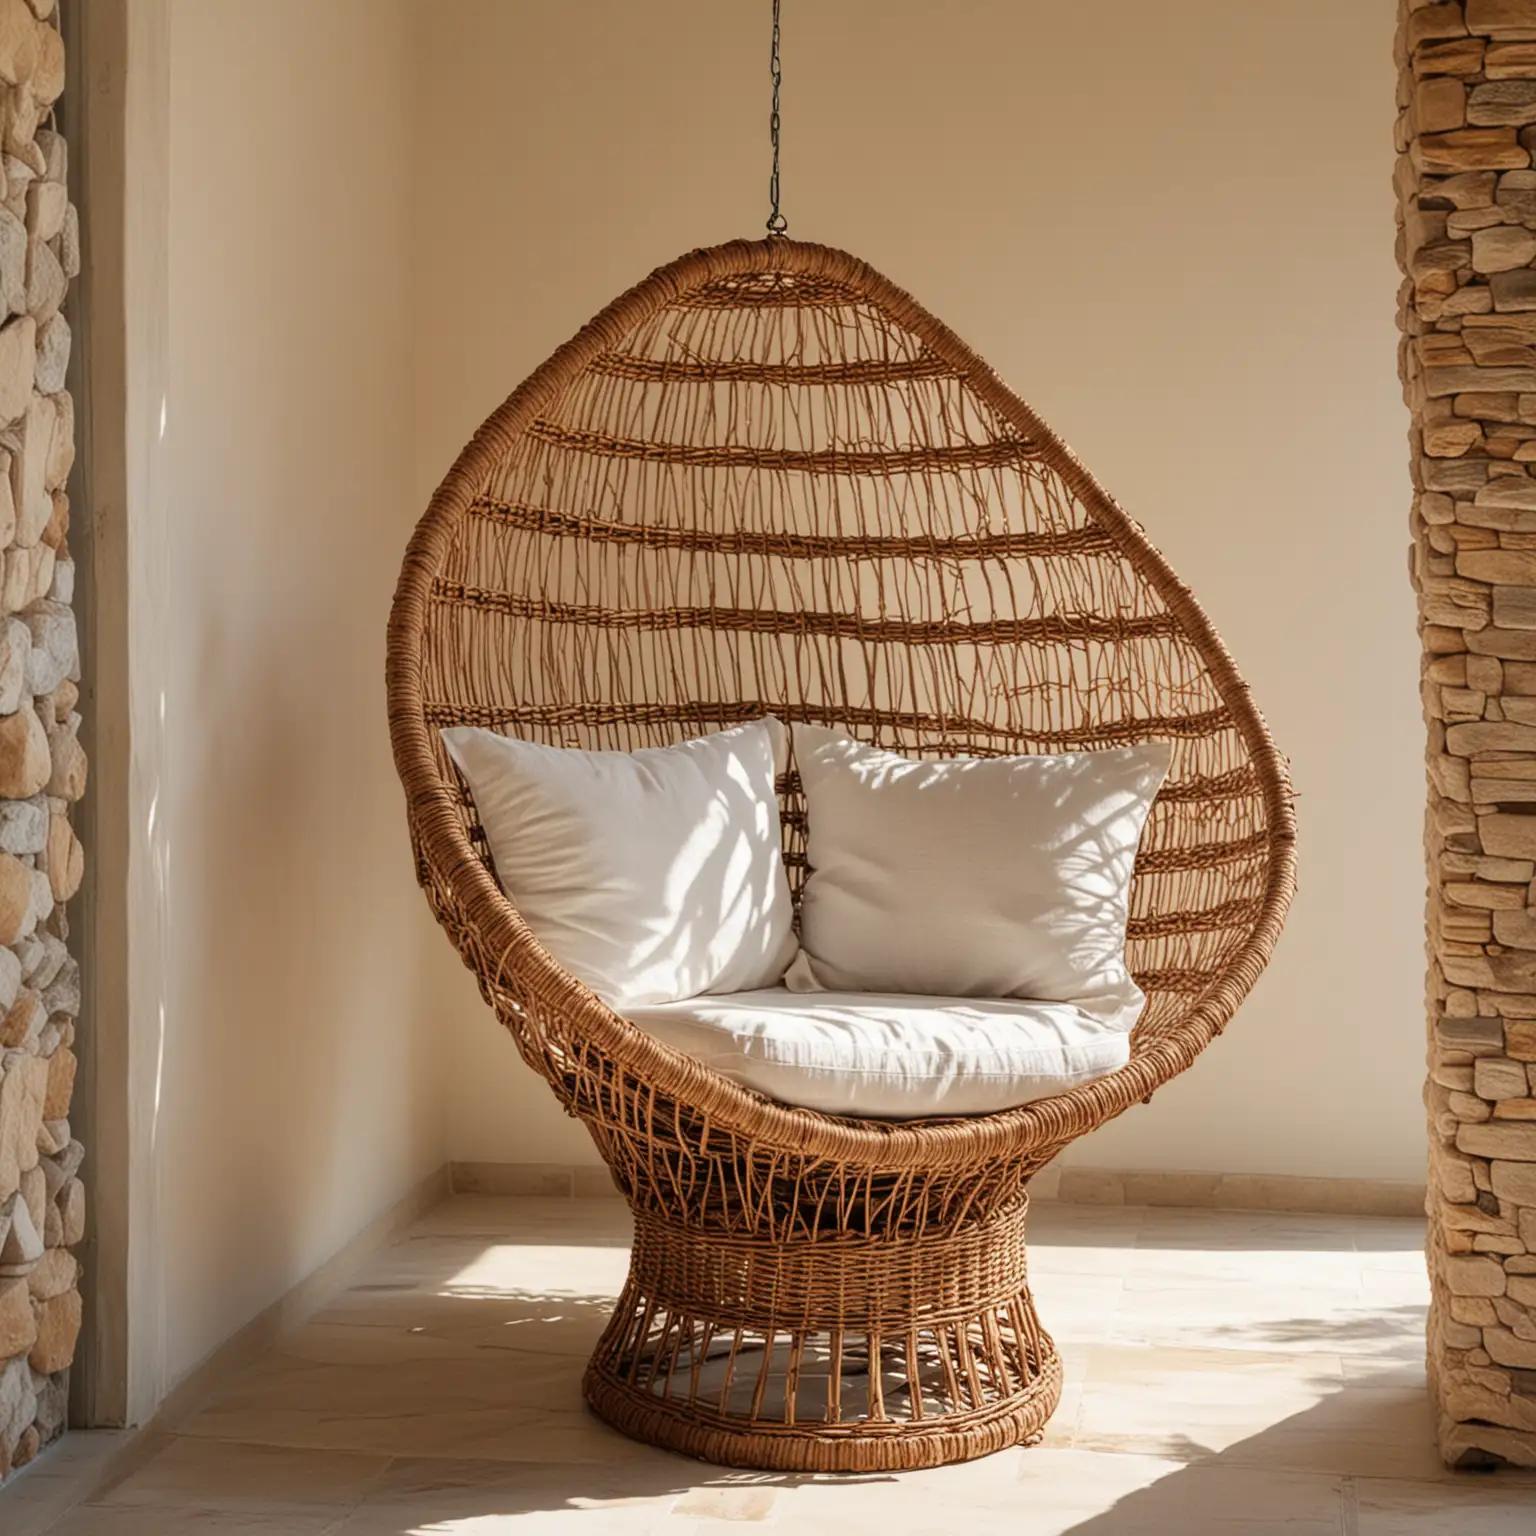 a luxury Villa in the Meditteranean Sea showing a close up of a wicker chair wih a wicker lampshade hanging above it